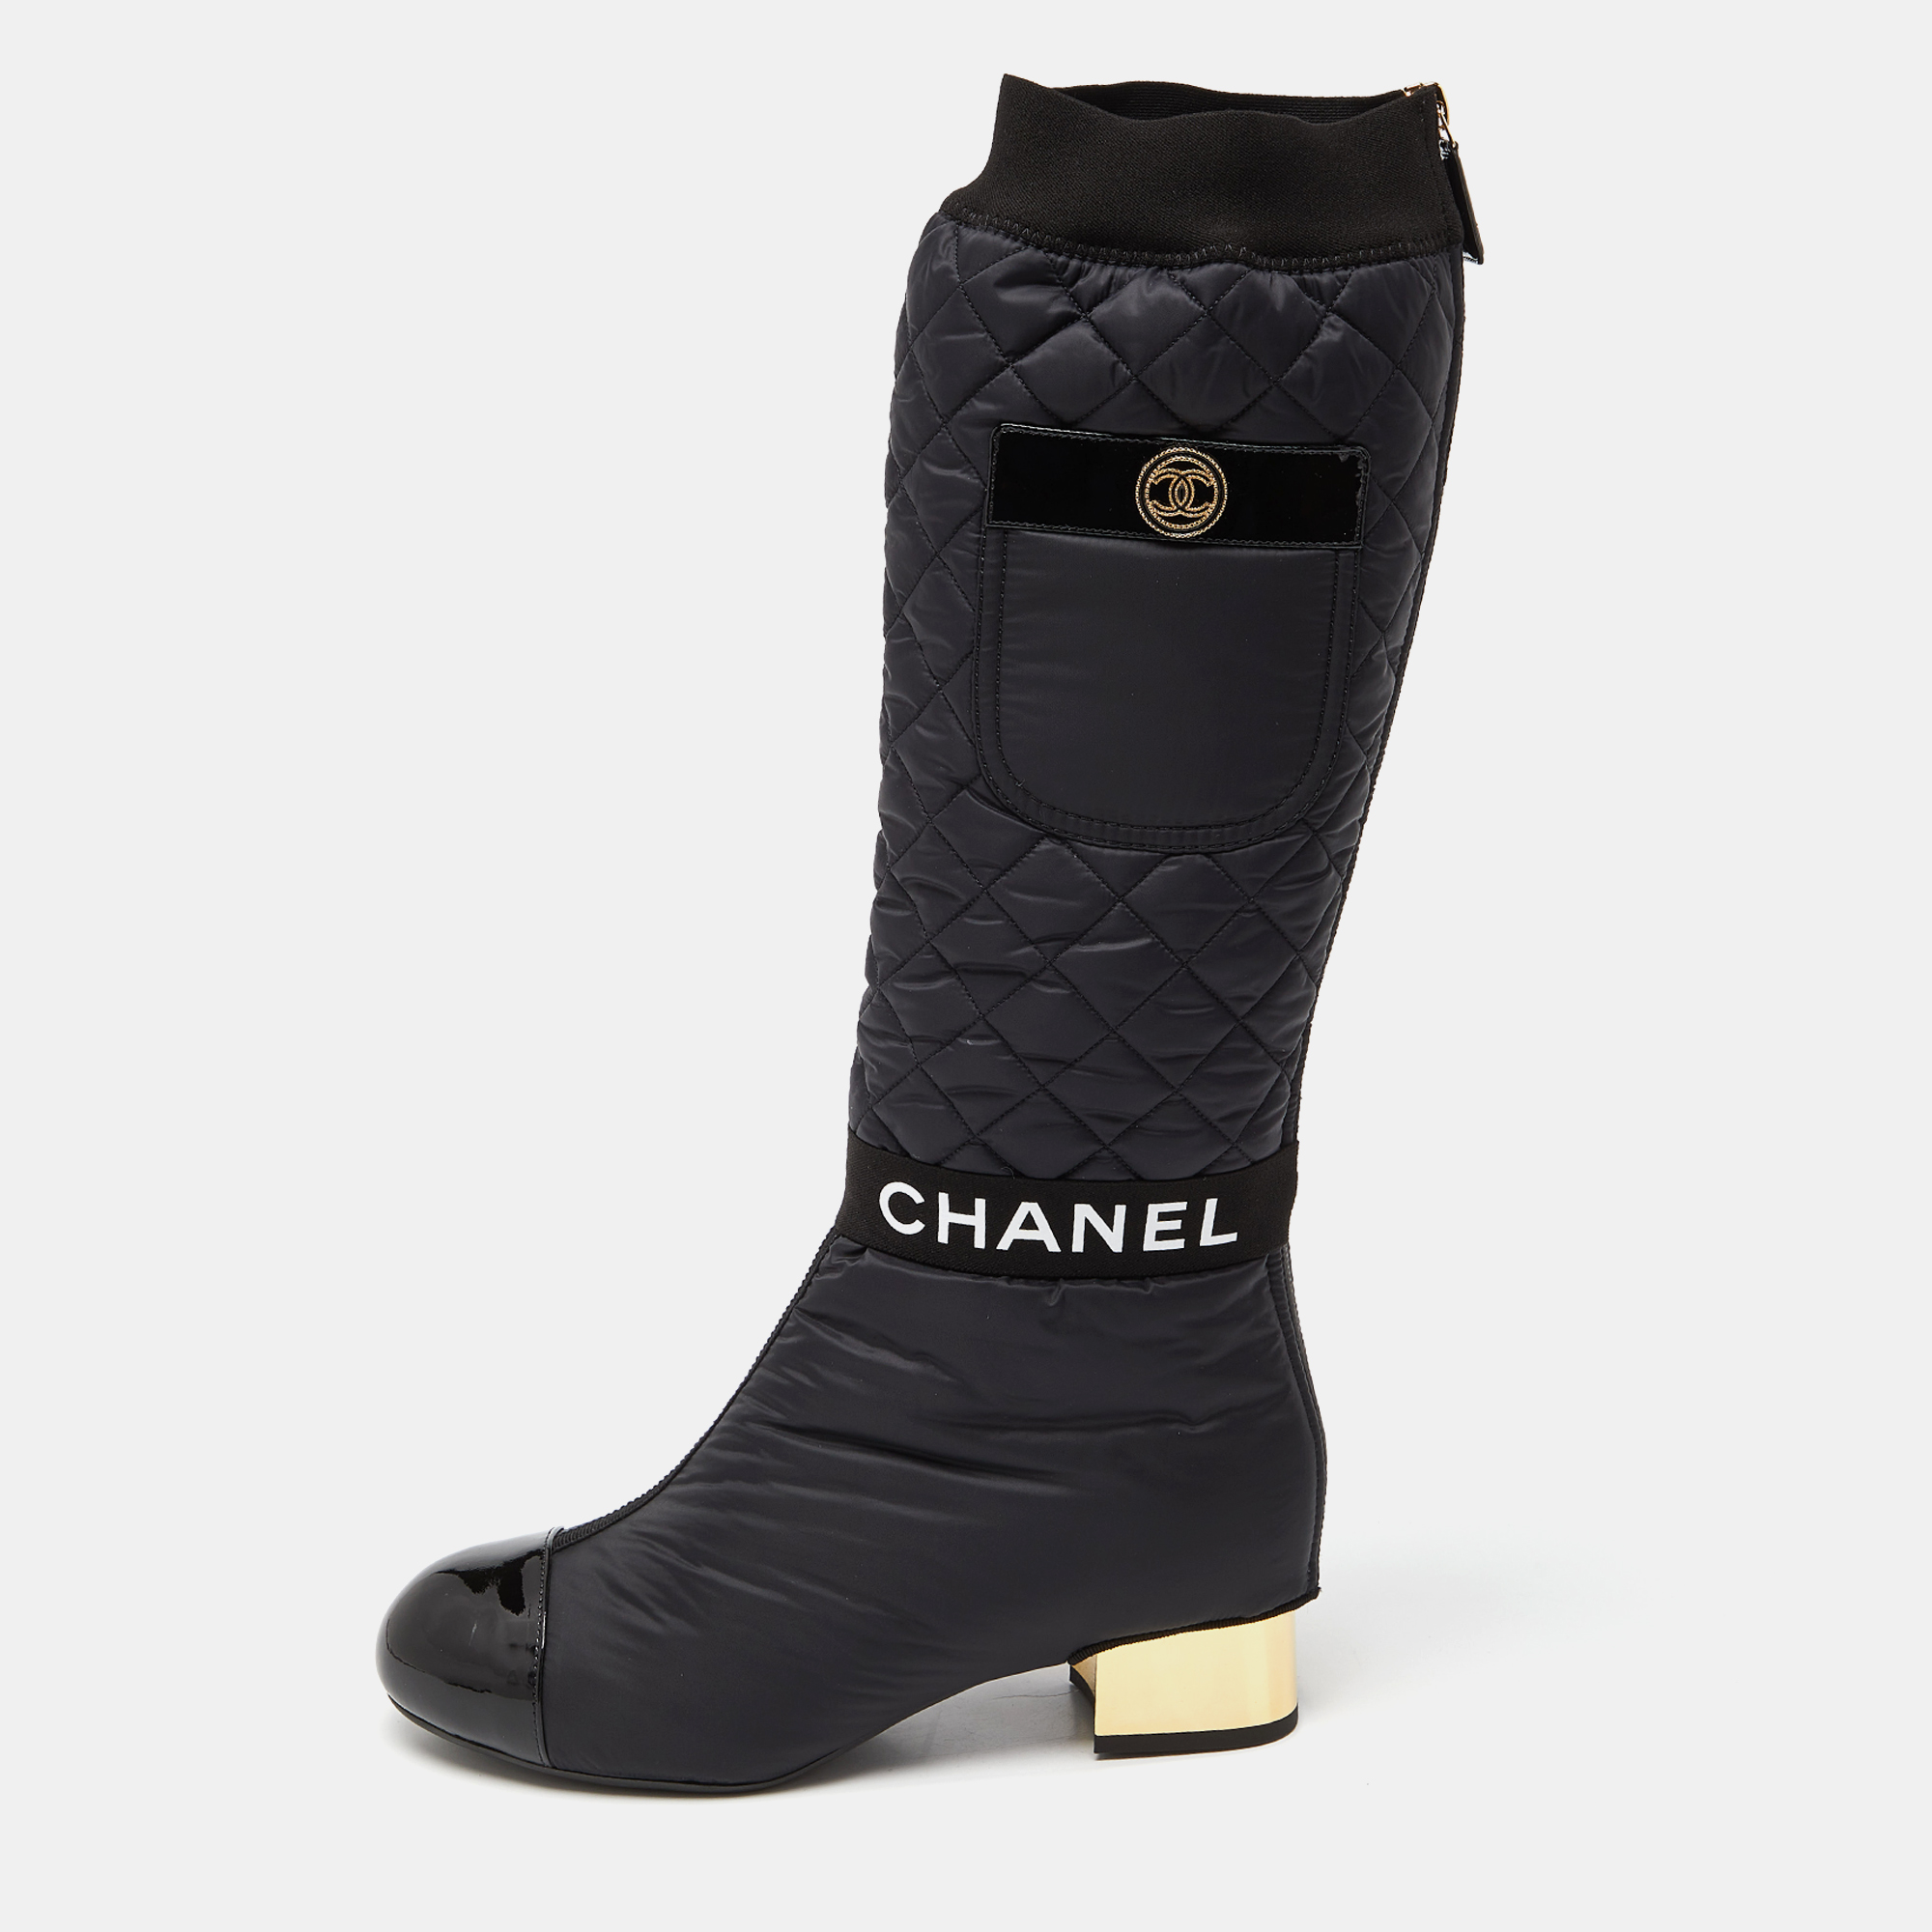 Chanel Black Nylon And Patent Leather Interlocking CC Knee High Sock Boots Size 38.5